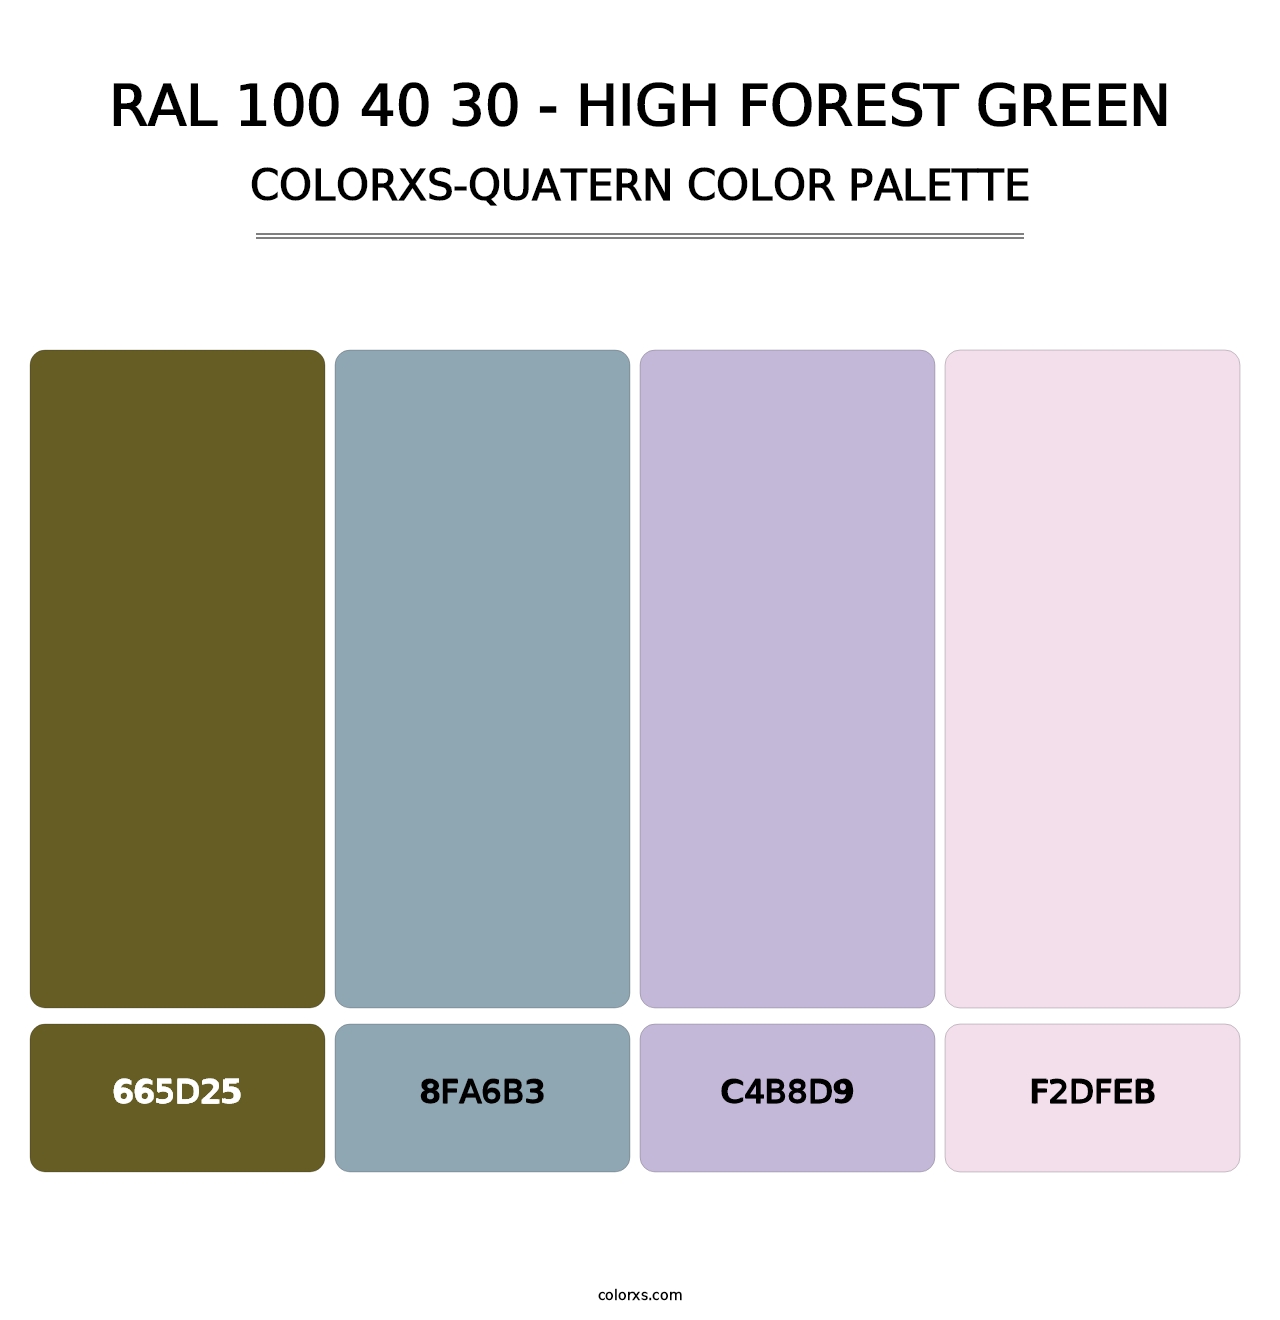 RAL 100 40 30 - High Forest Green - Colorxs Quatern Palette